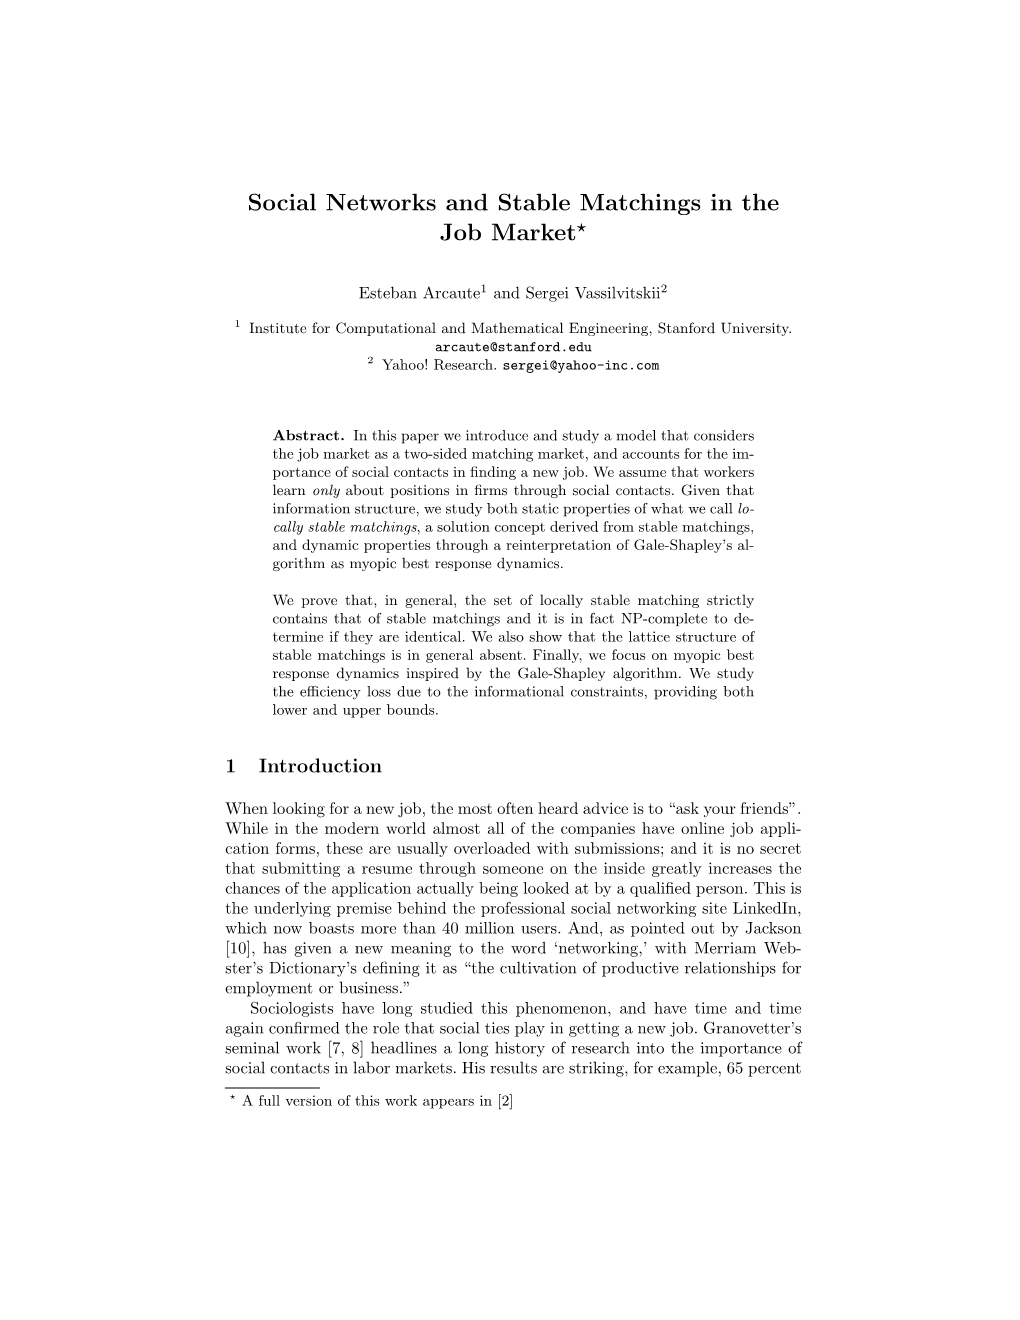 Social Networks and Stable Matchings in the Job Market*